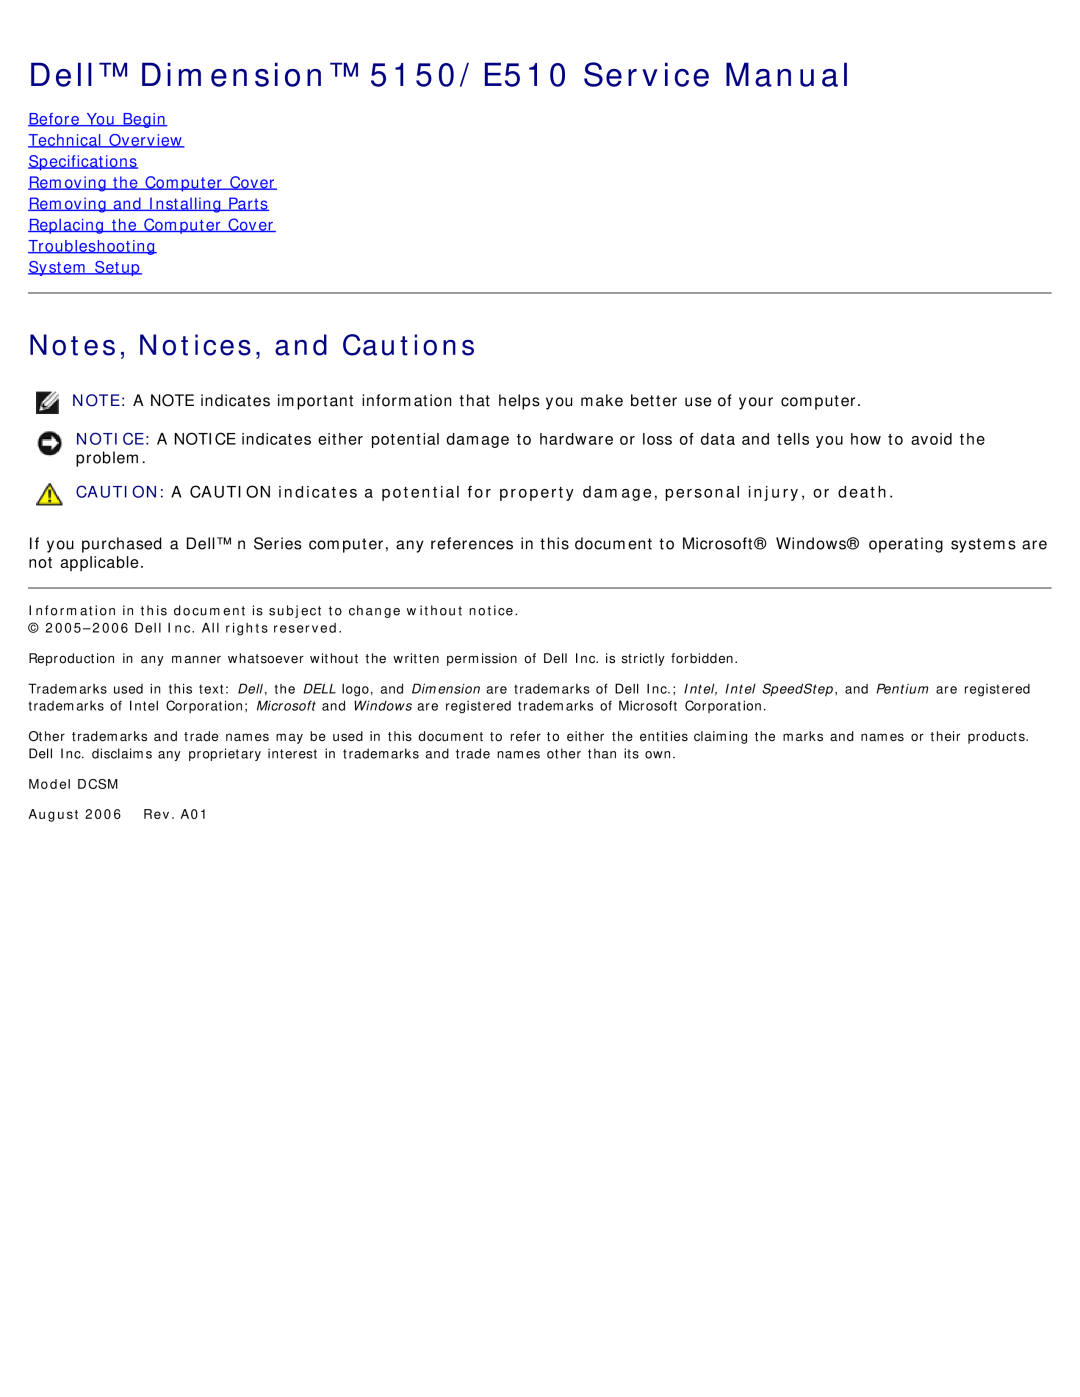 Dell DCSM manual Dell Dimension 5150/E510 Service Manual, Notes, Notices, and Cautions 